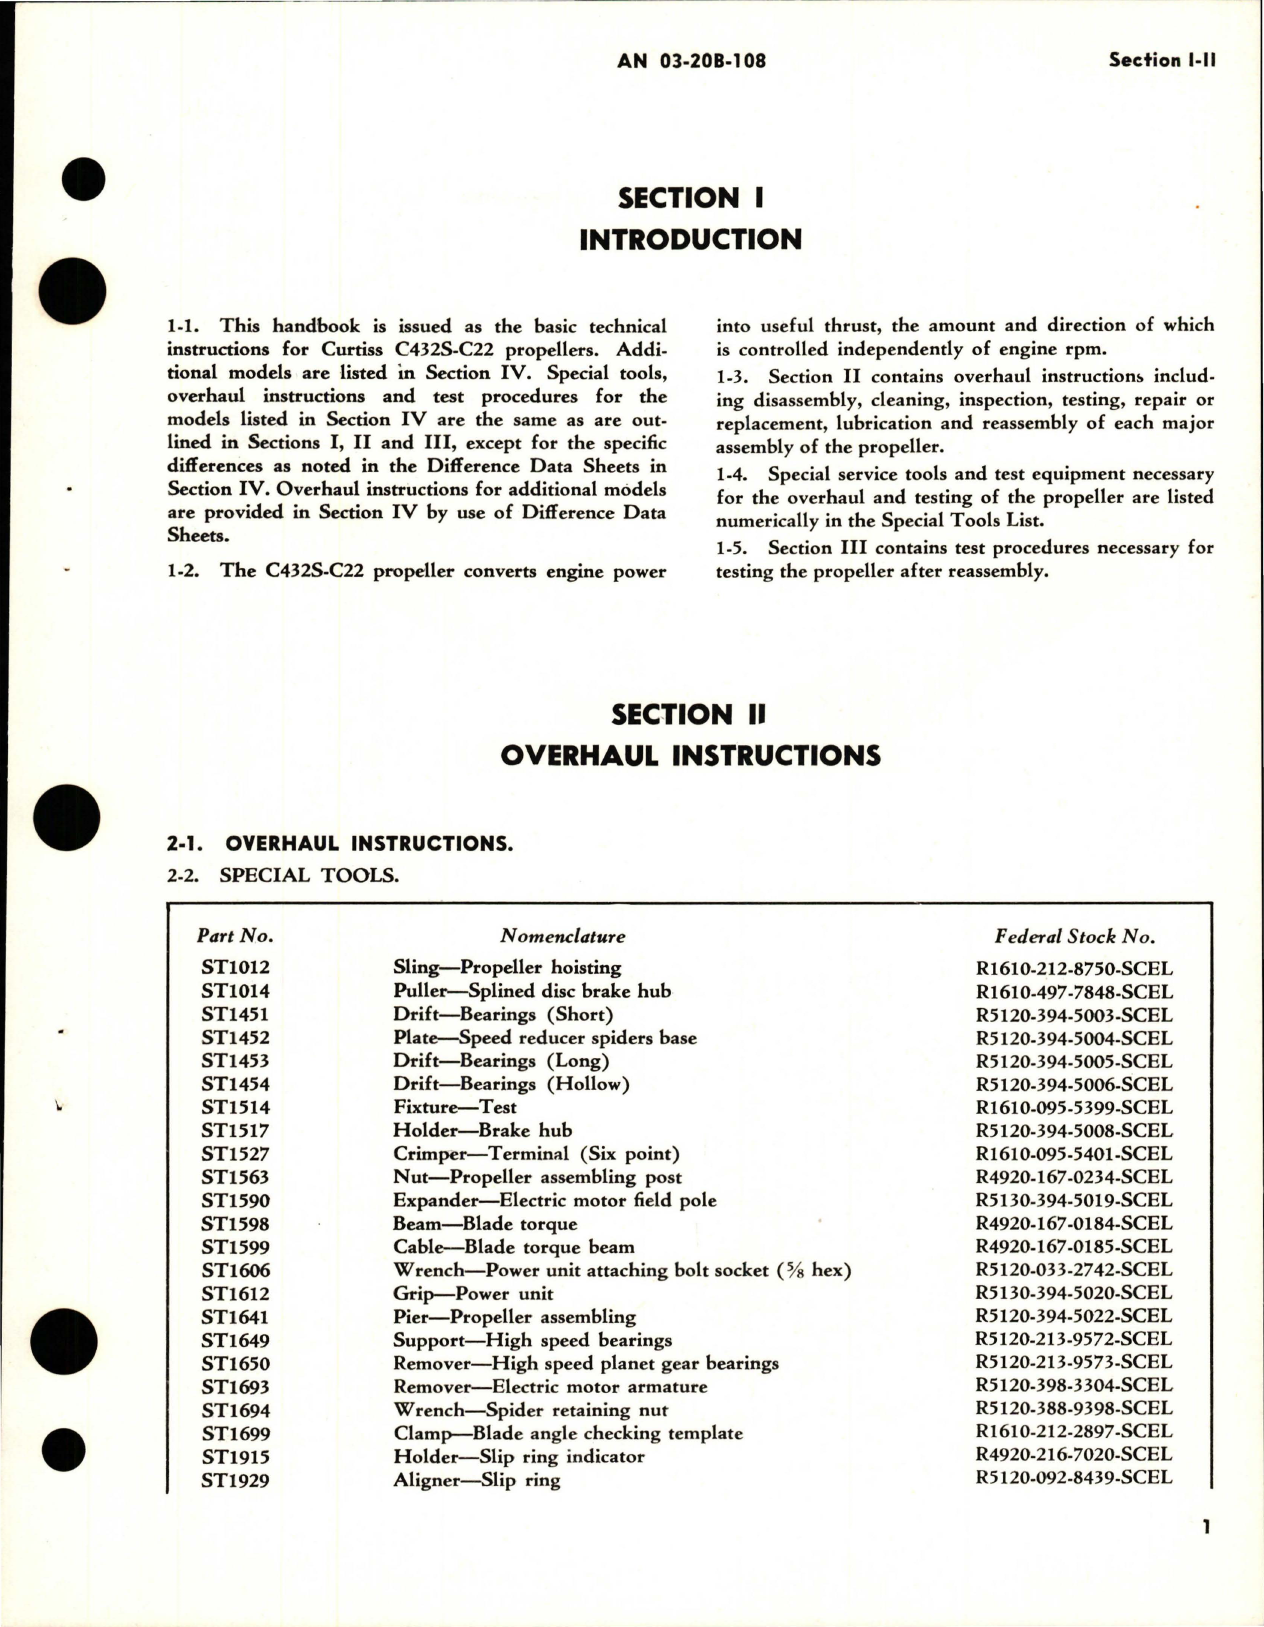 Sample page 7 from AirCorps Library document: Overhaul Instructions for Pitch Lever Type Electric Propeller - Models C432S-C2, C432S-C22, C432S-C24, C432S-C-26 